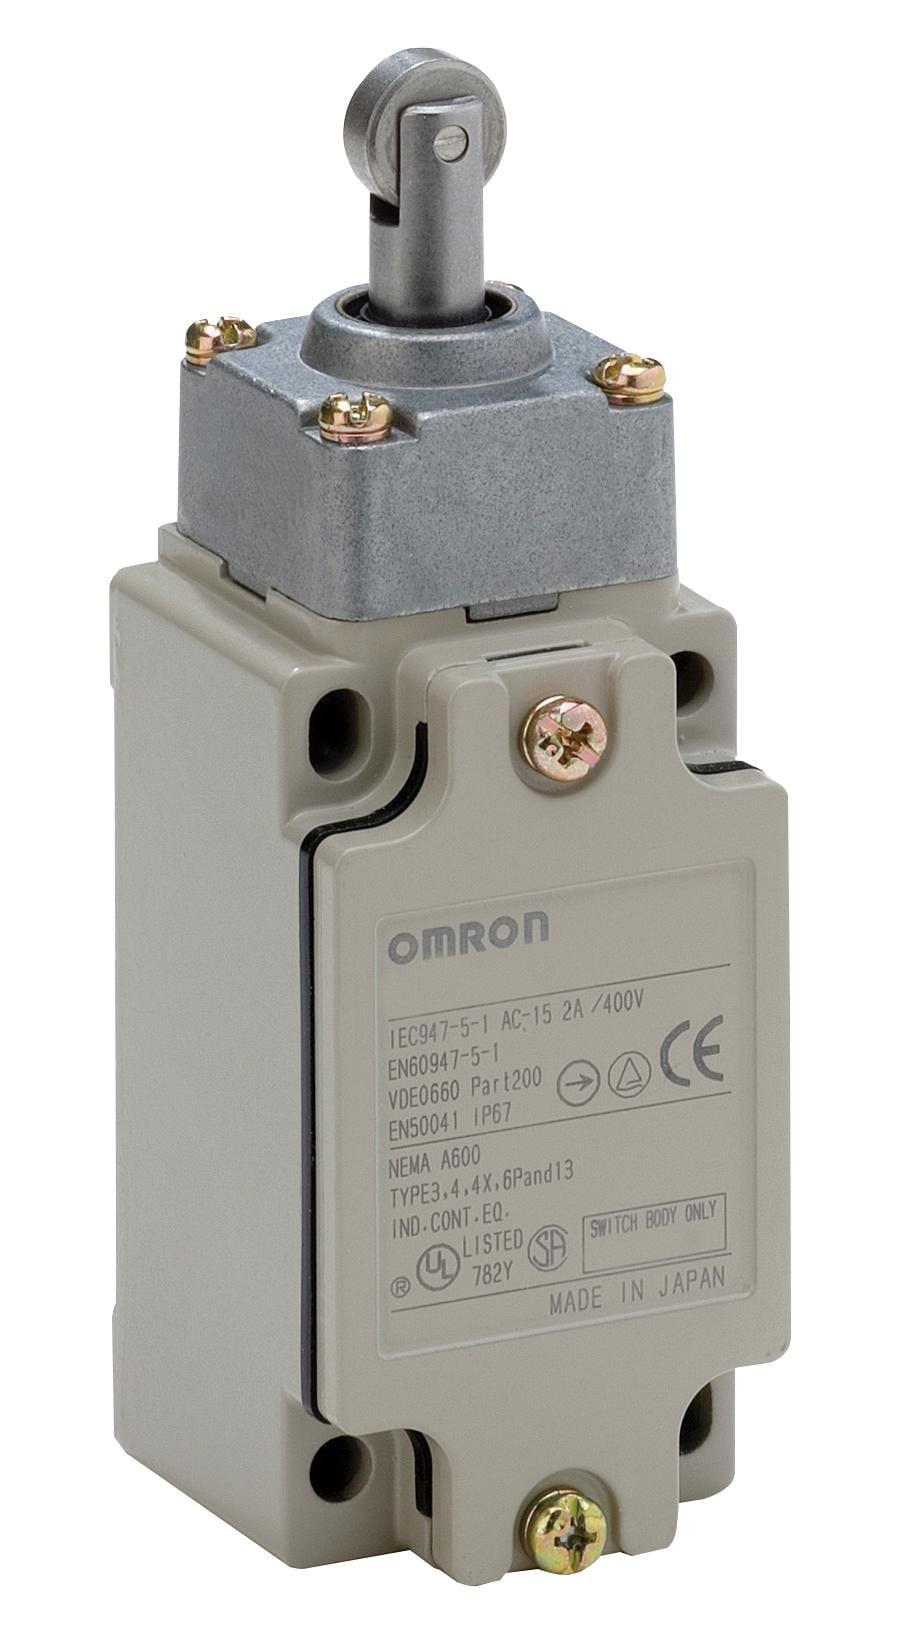 OMRON Limit Switch D4B-4571N LIMIT SWITCH SWITCHES OMRON 3413223 D4B-4571N